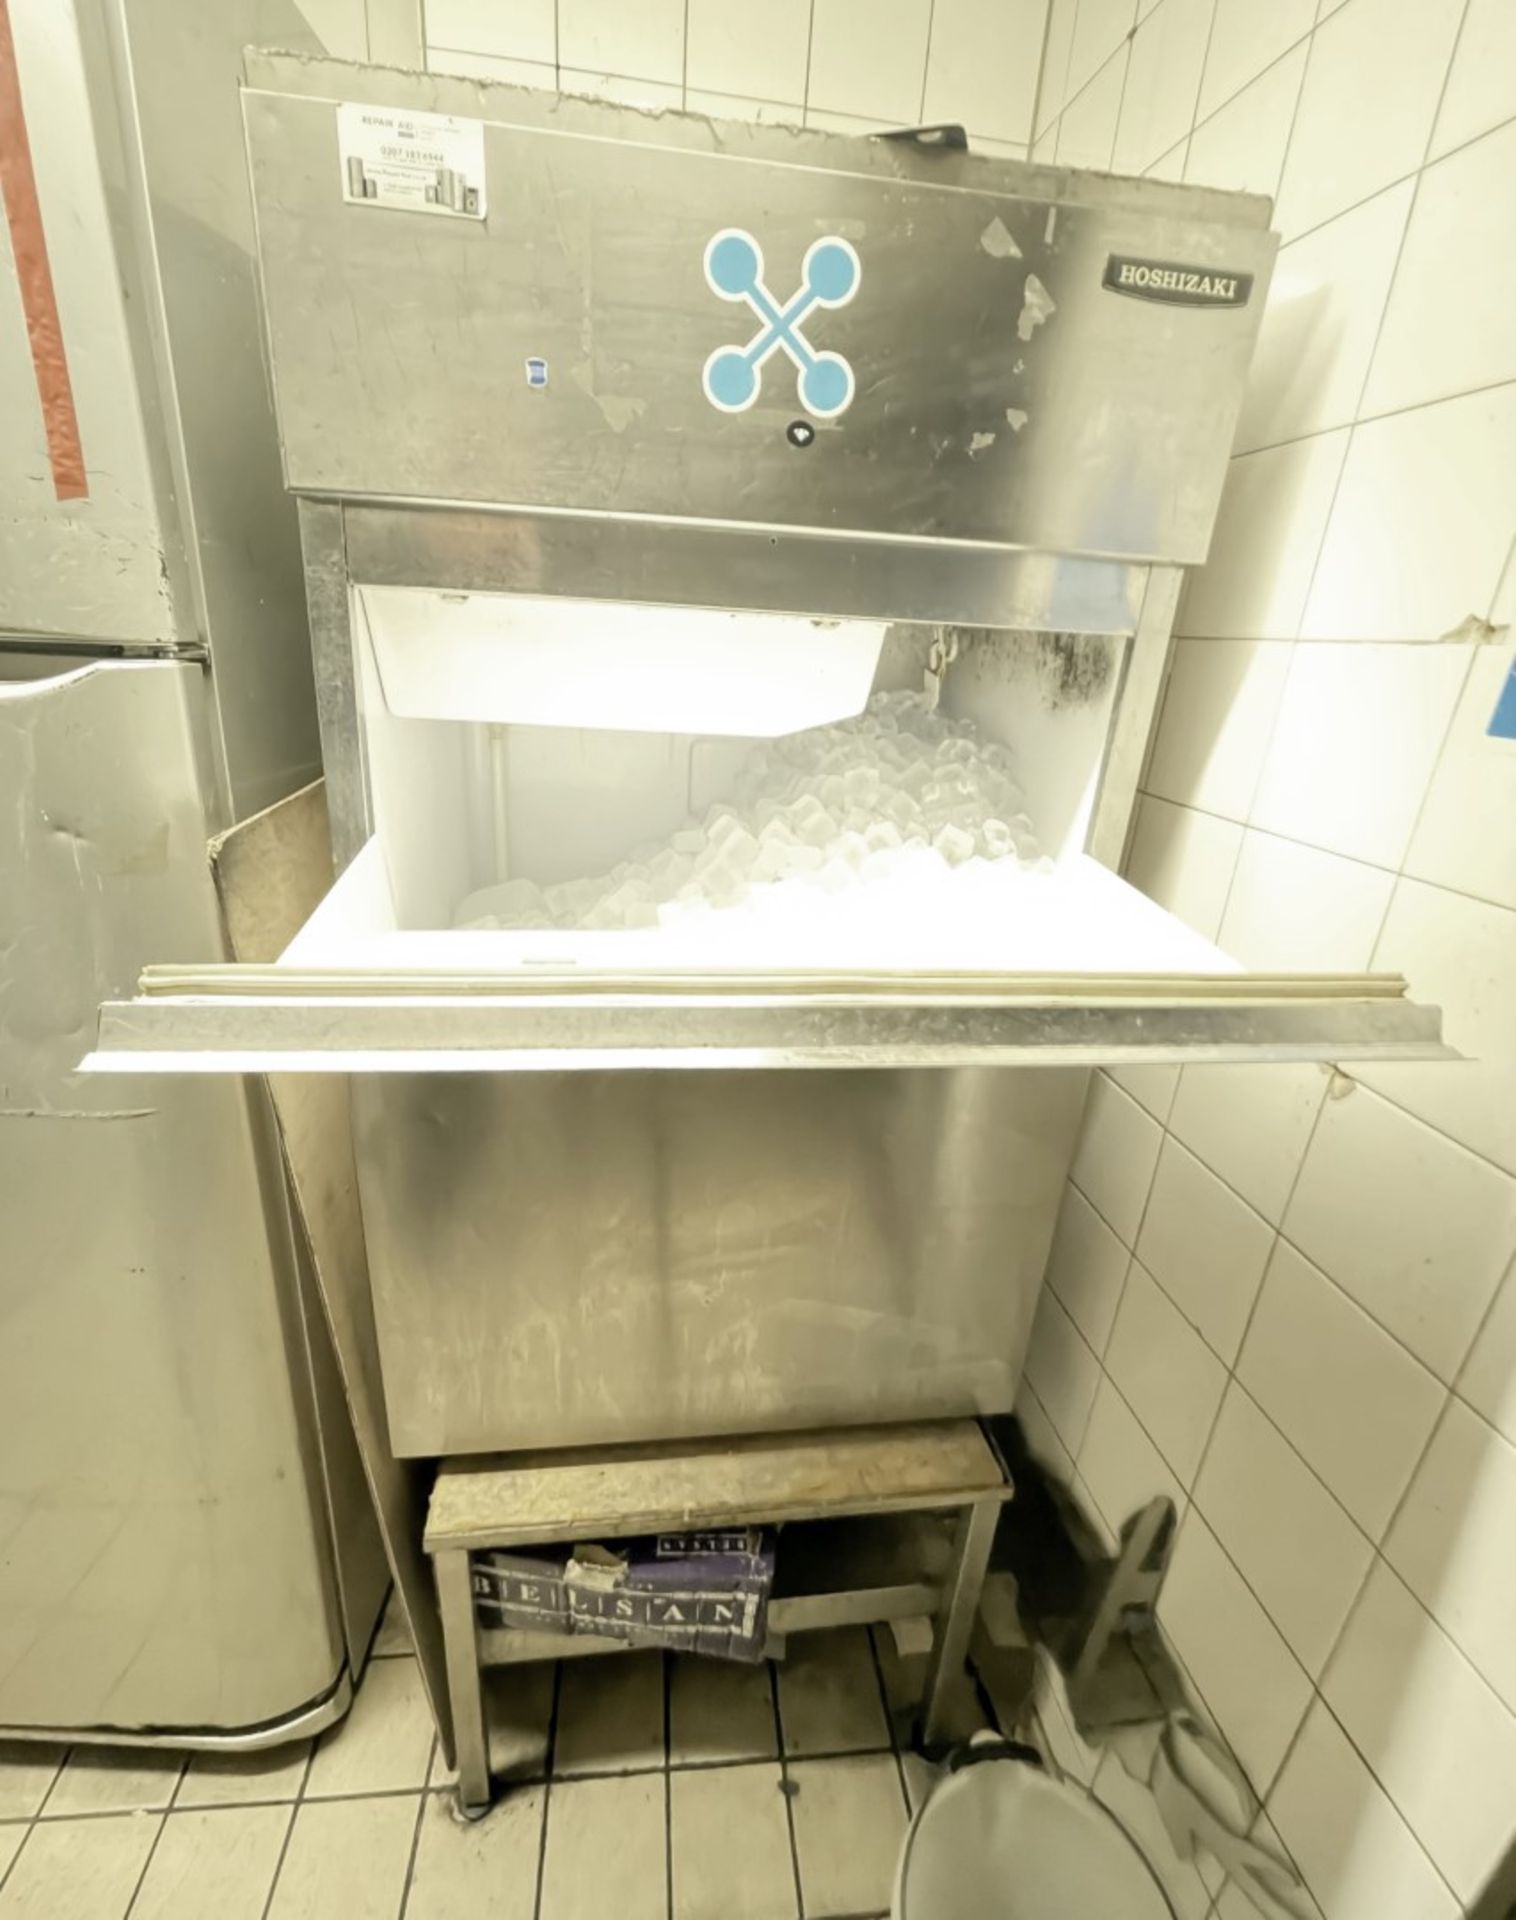 1 x HOSHIZAKI Commercial Stainless Steel Water Cooled Ice Cube Maker IM-100WLE - Image 5 of 6